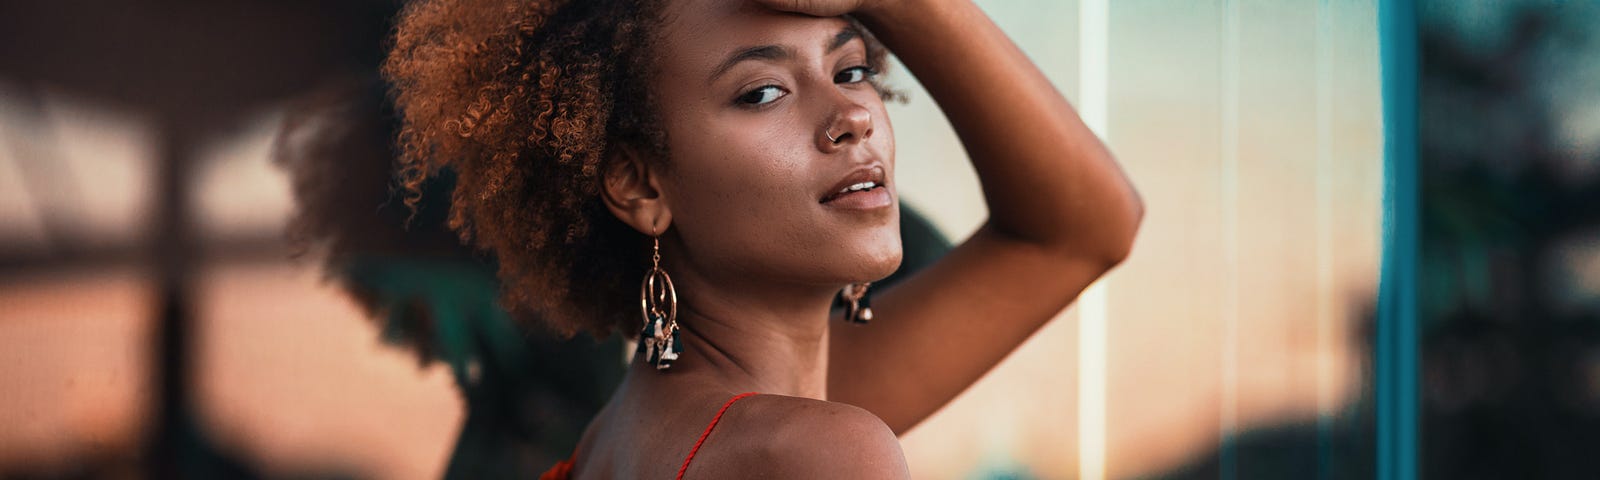 Experiences that will help you determine your values — dark skinned model looking at the camera